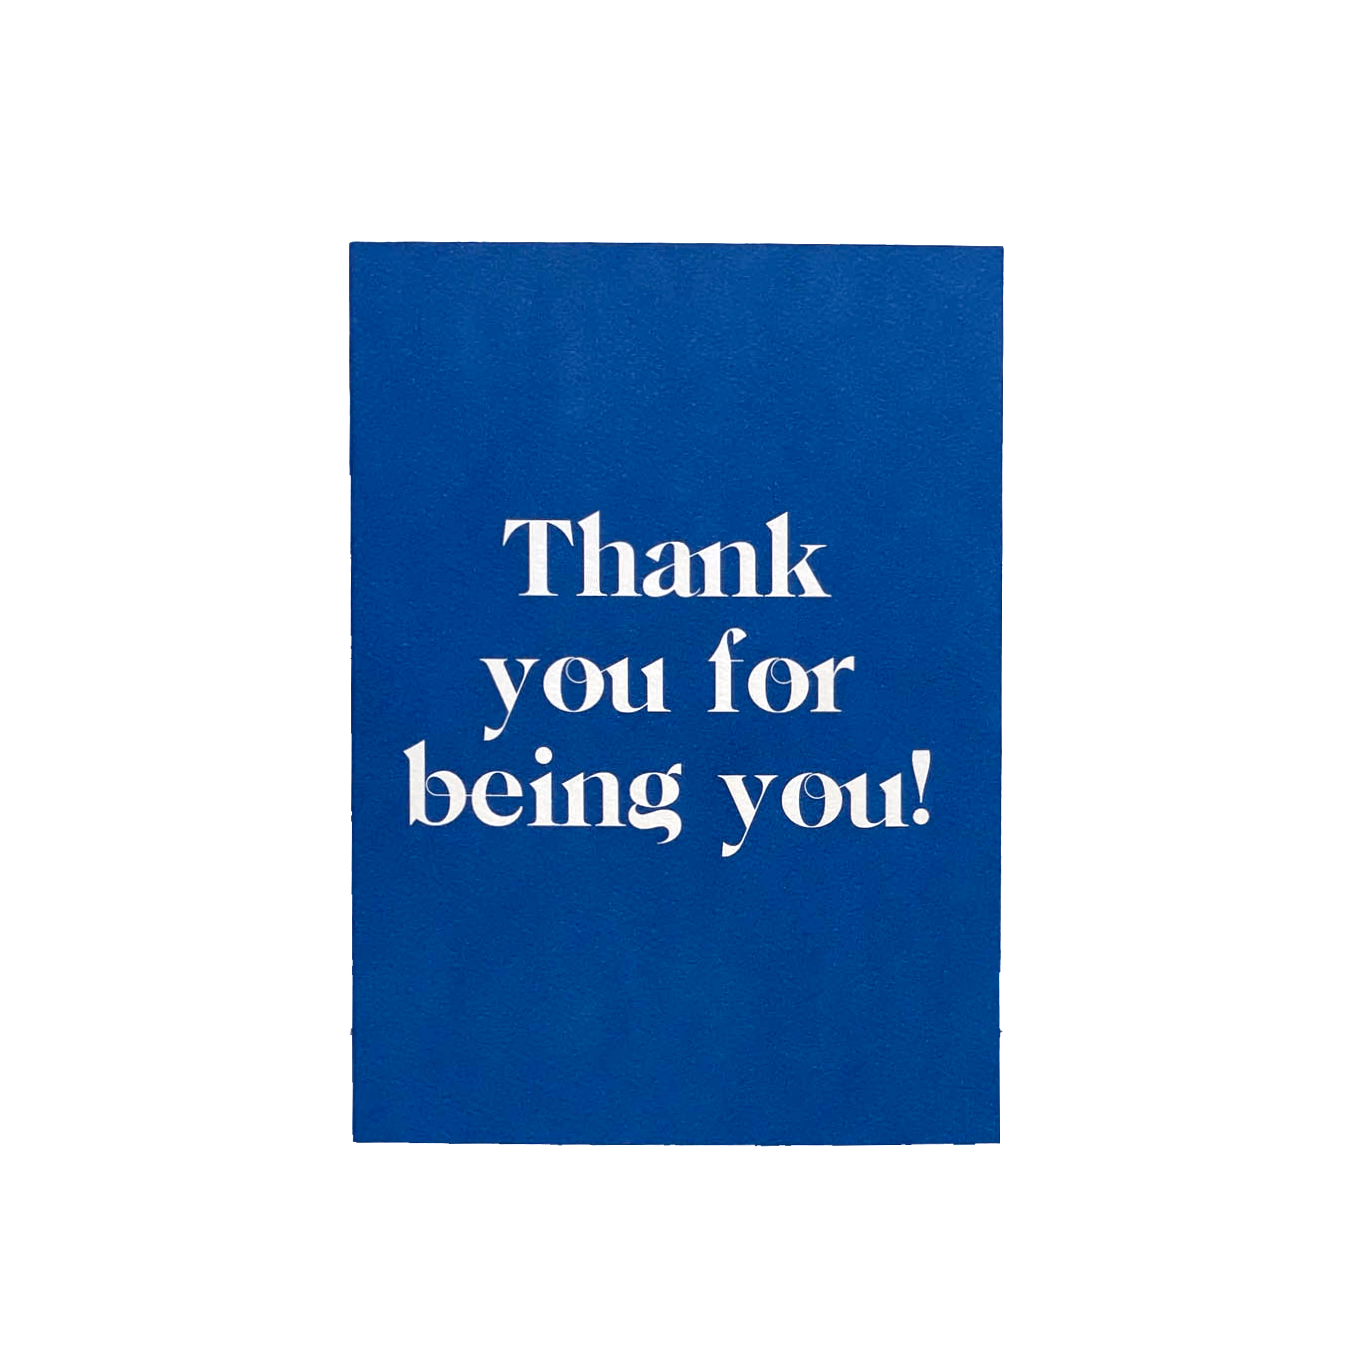 Blue "Thank you for being you card" that reads "Thank you for being you!" on the cover in white bold text